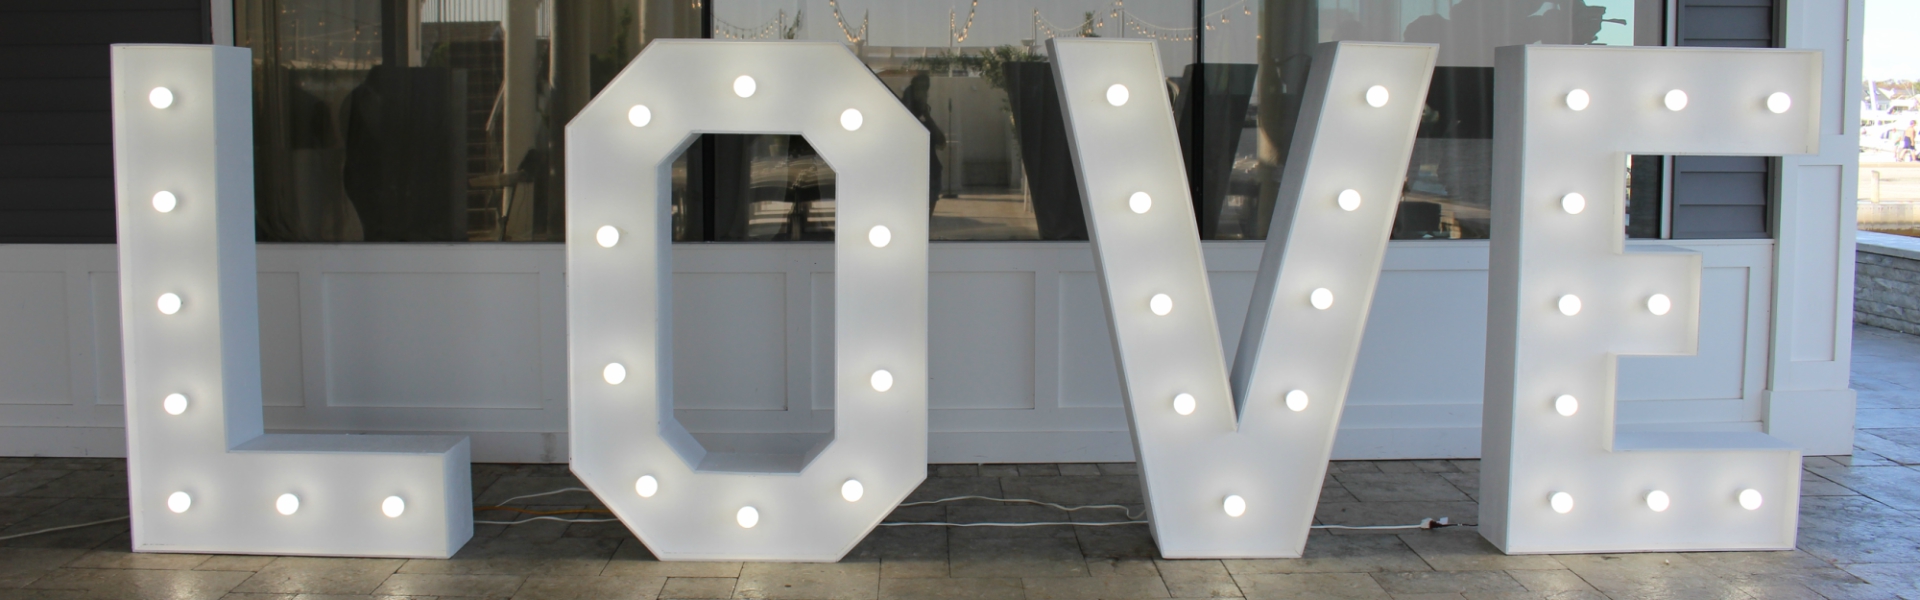 Brittany's Party Extravaganza - Marquee Letters